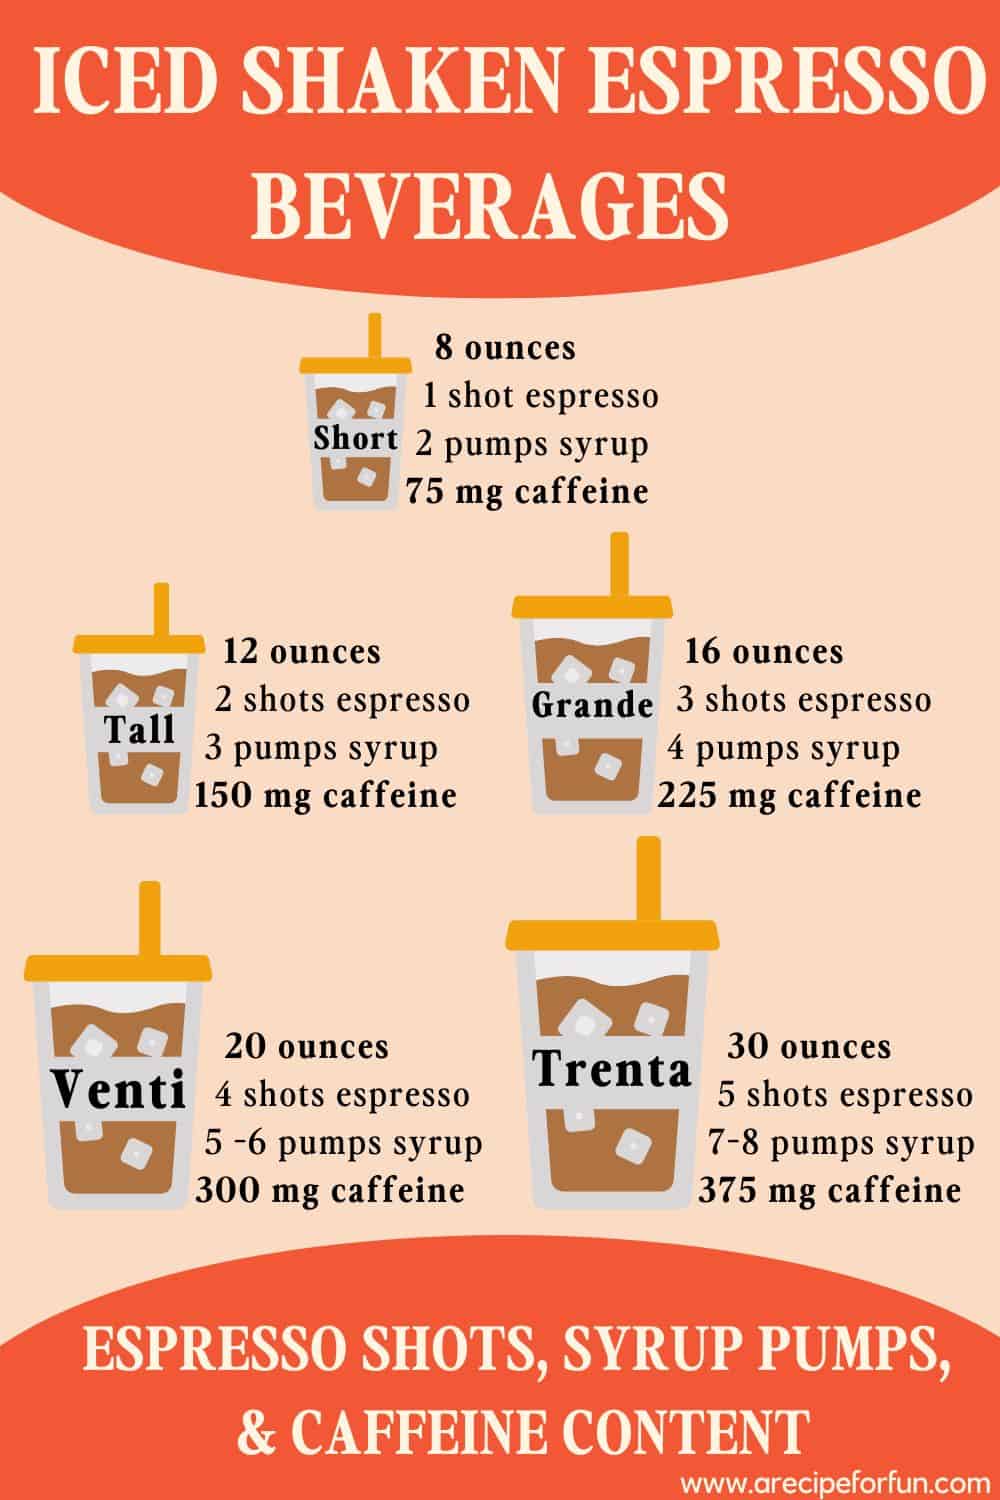 An infographic sharing sizes of popular coffee beverages from Starbucks and the amount of espresso, milk, and sugar in the beverages.